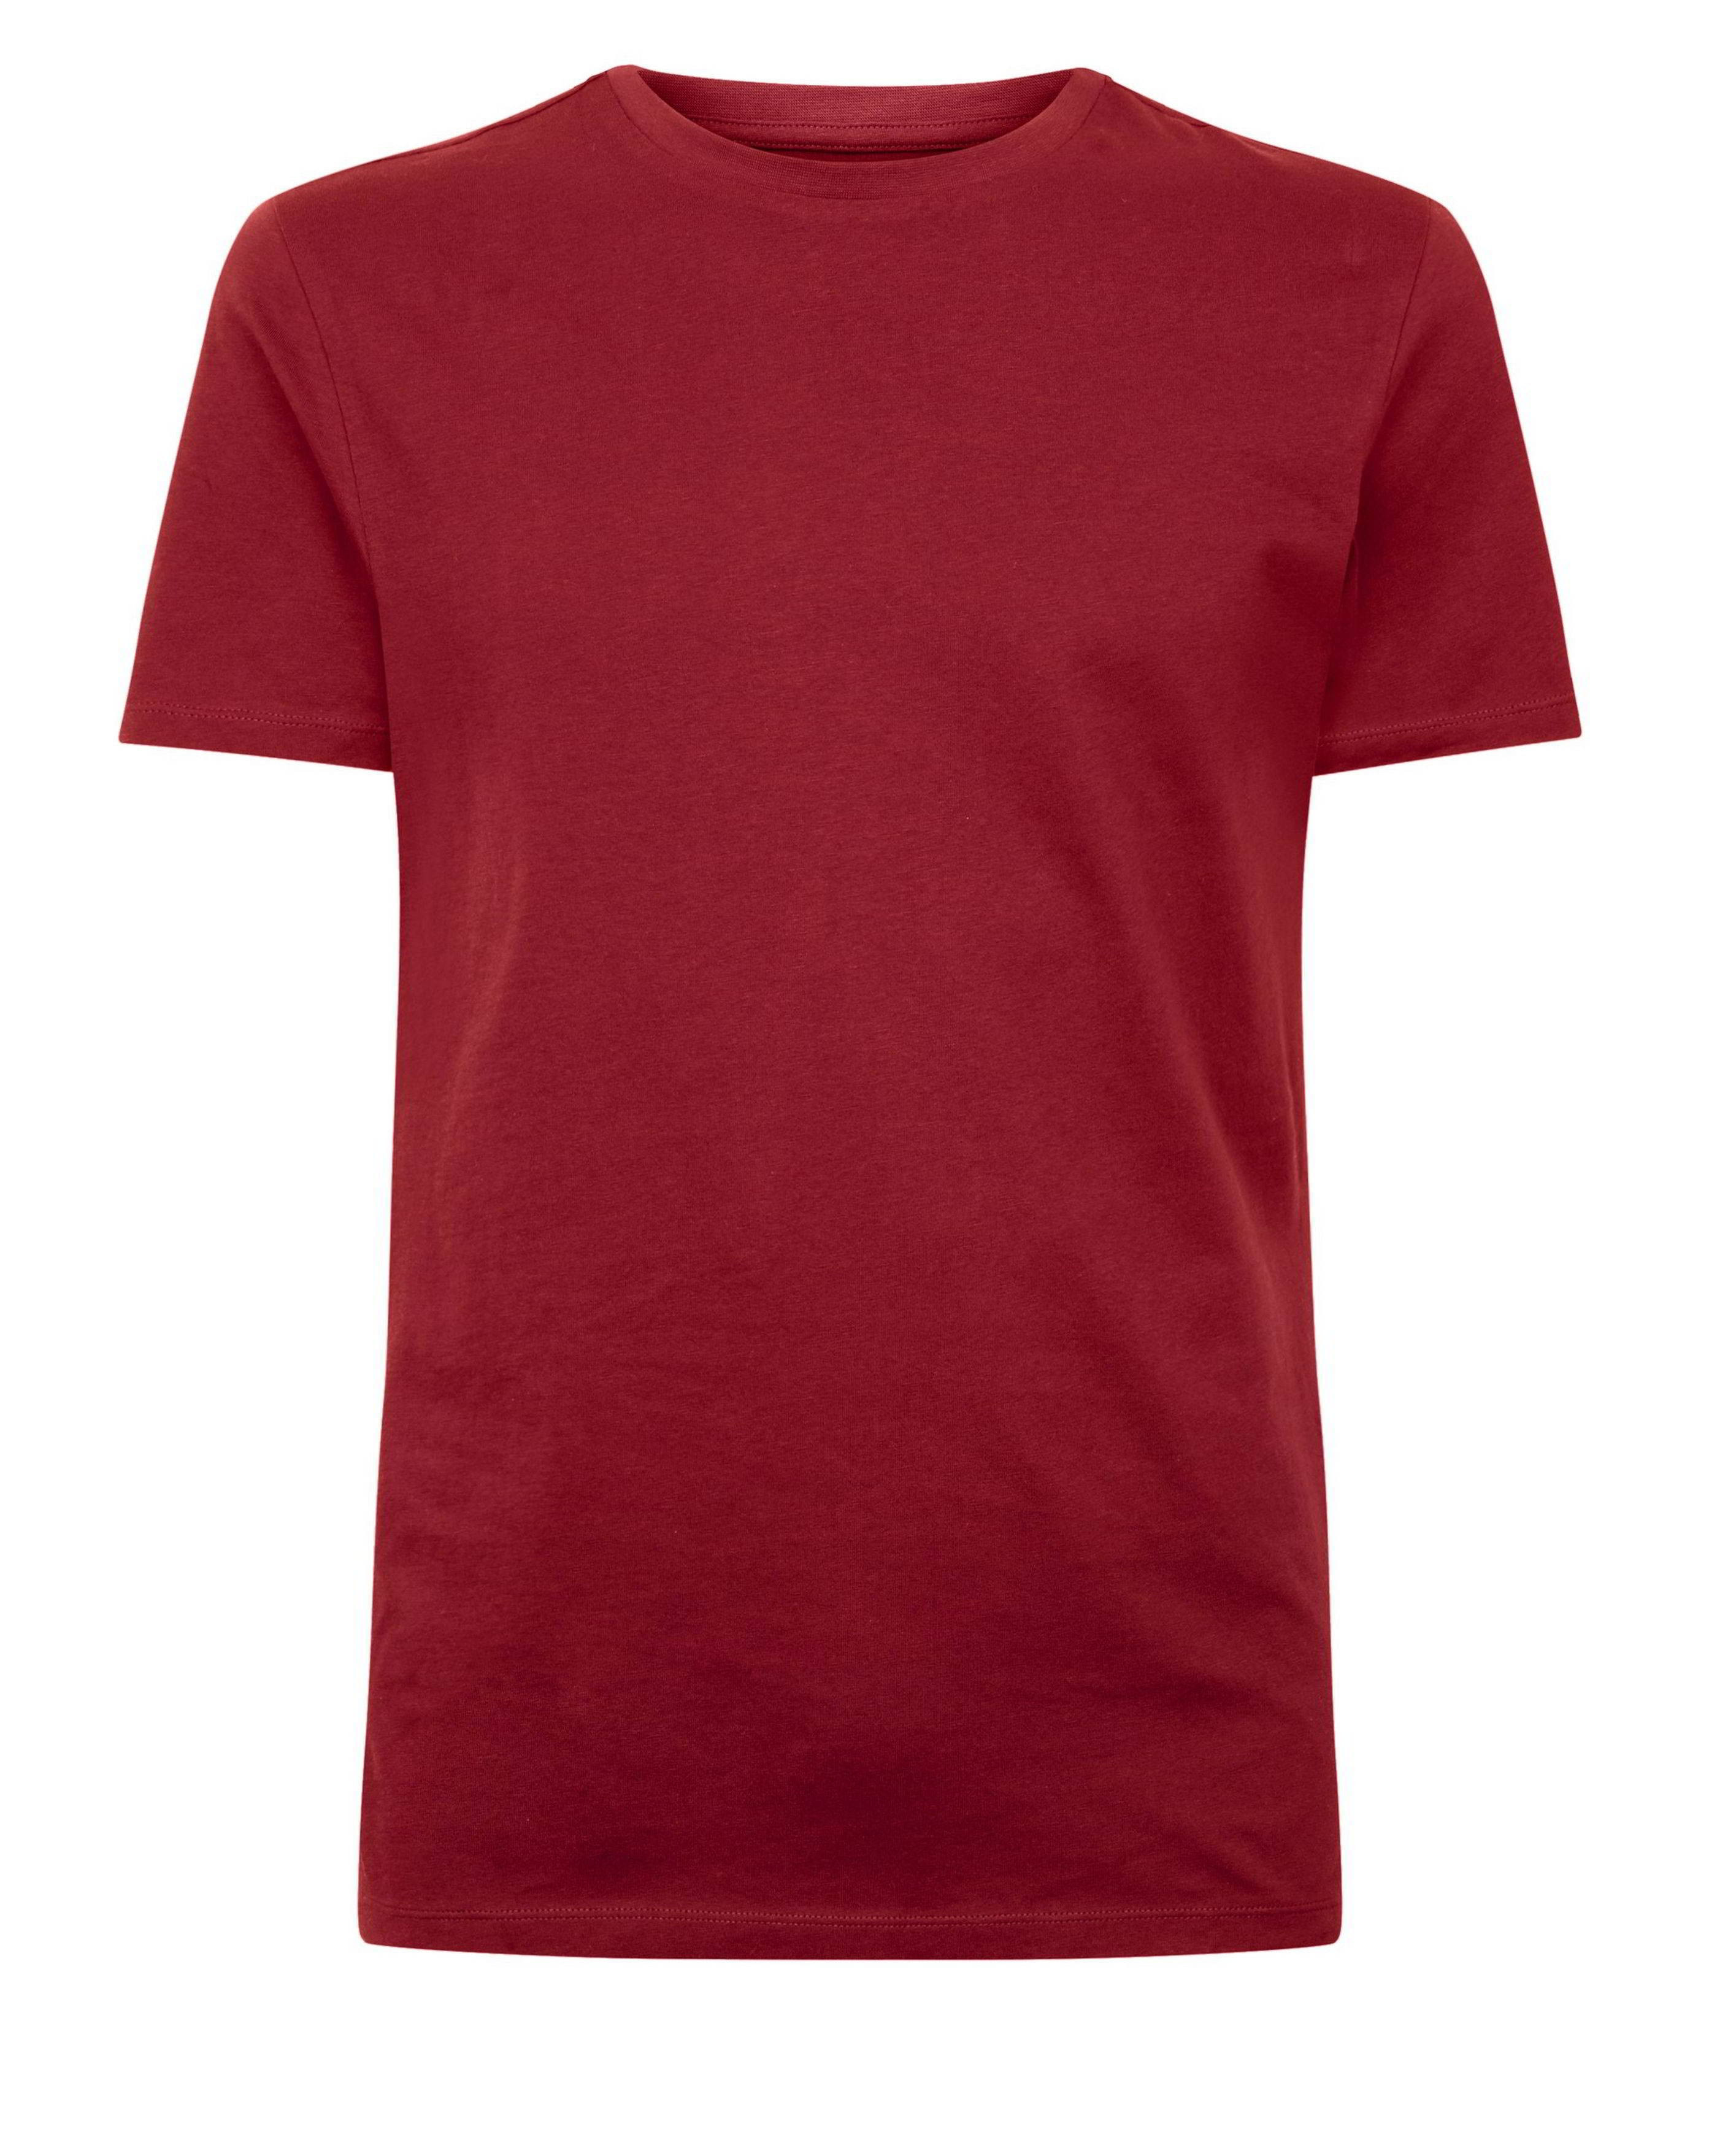 Maroon Short Sleeves Muscles Gym Fit T Shirt